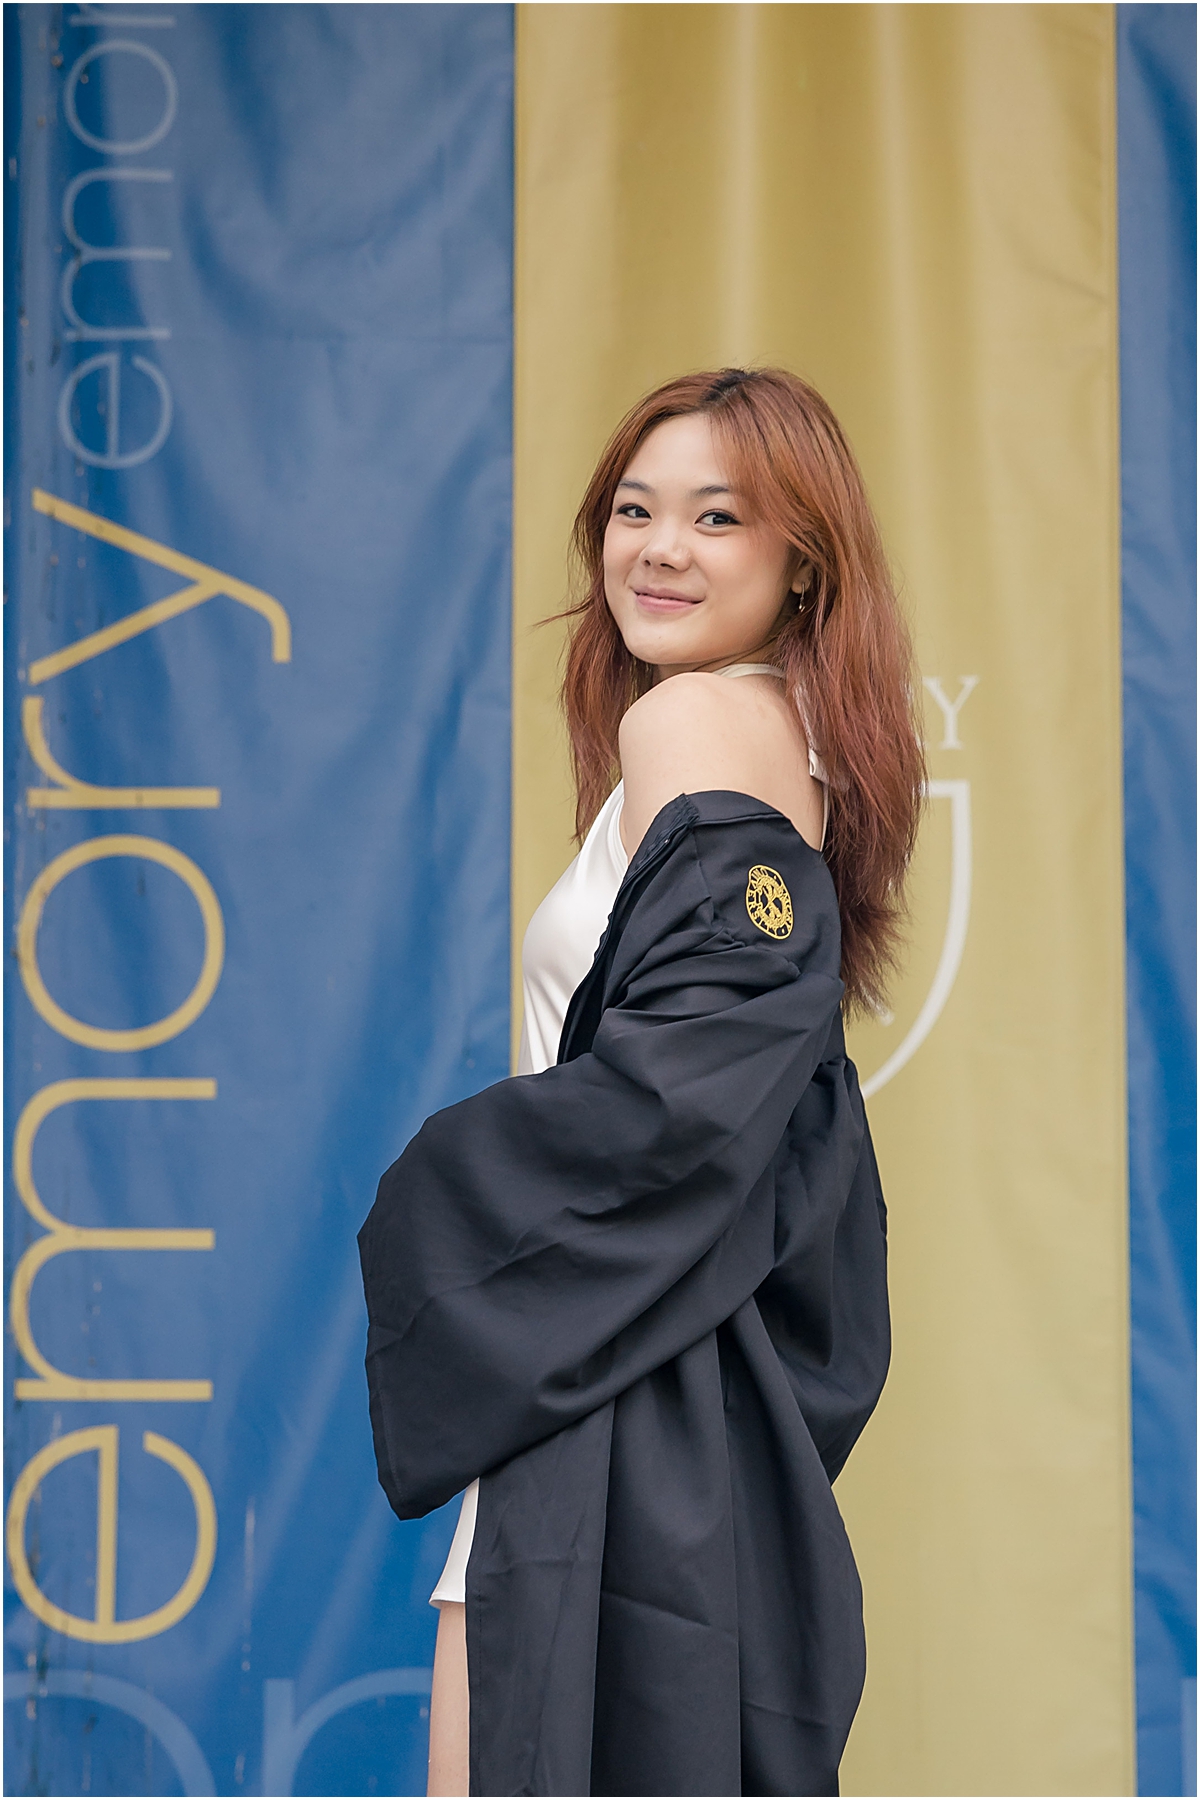 Female standing in front of gold and blue banner smiling at an Emory University Senior Photographer while she wears her open graduation gown off her shoulders to reveal a white dress